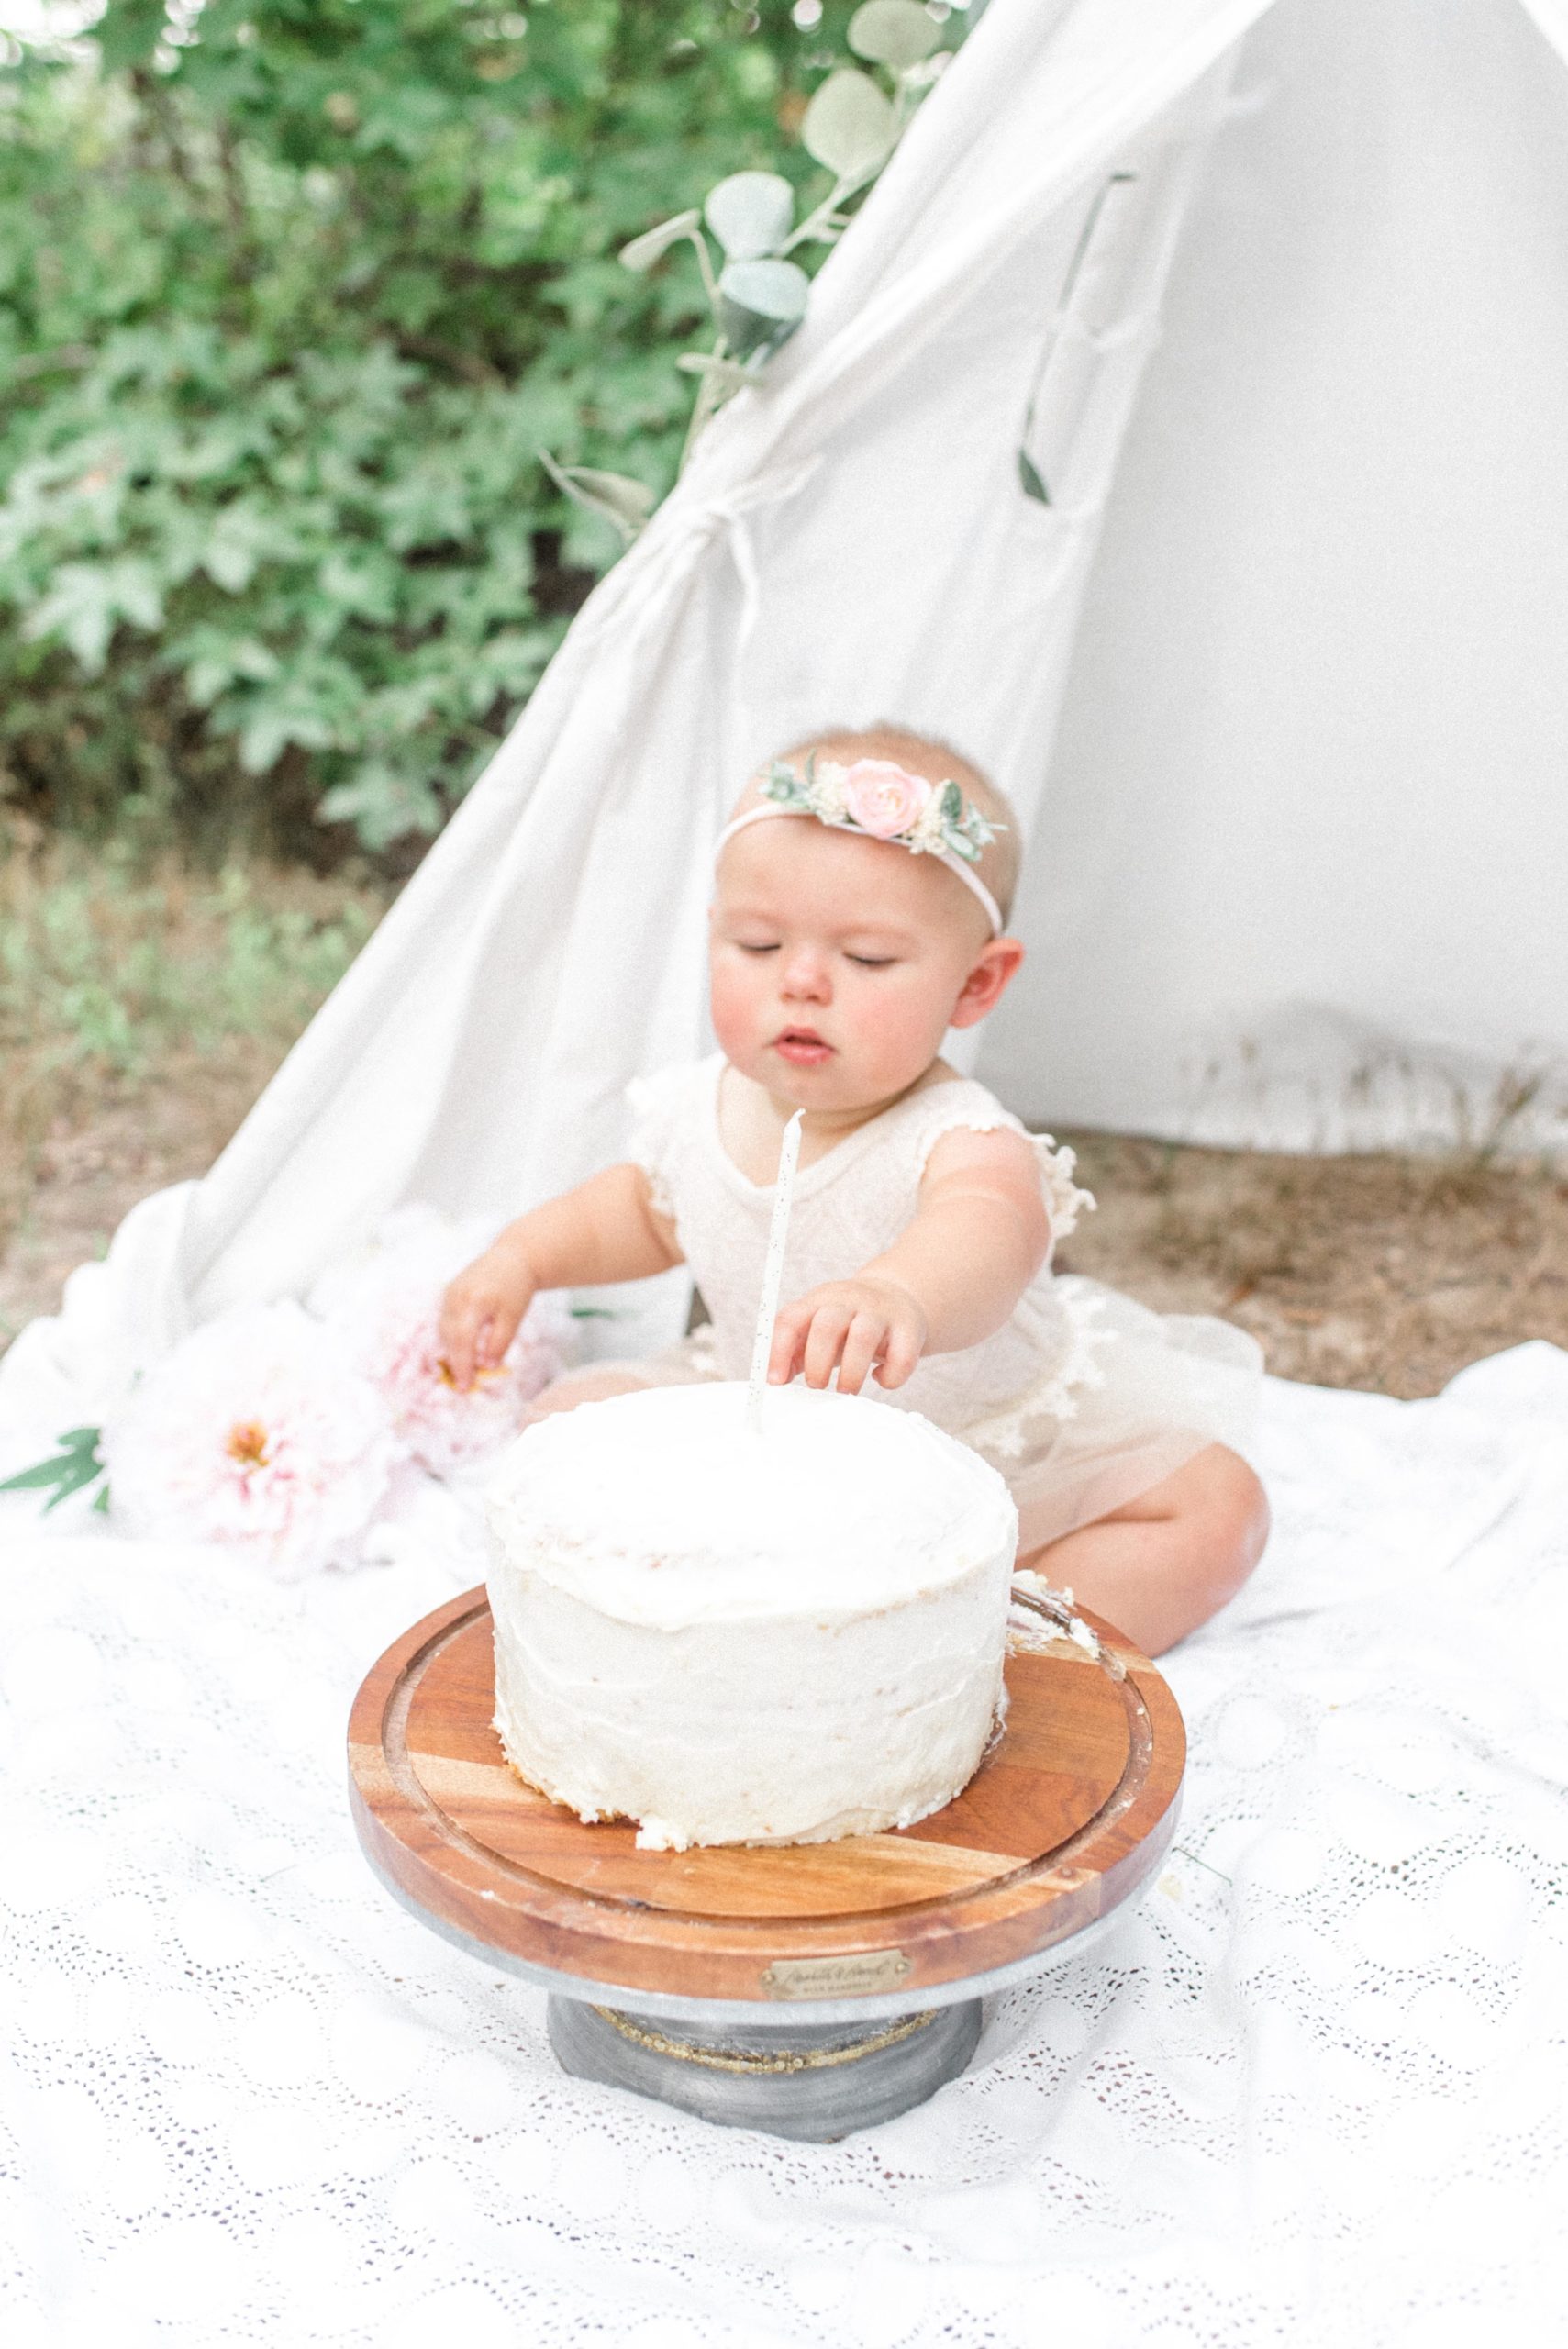 Leighton is celebrating her first birthday with a cake smash session.